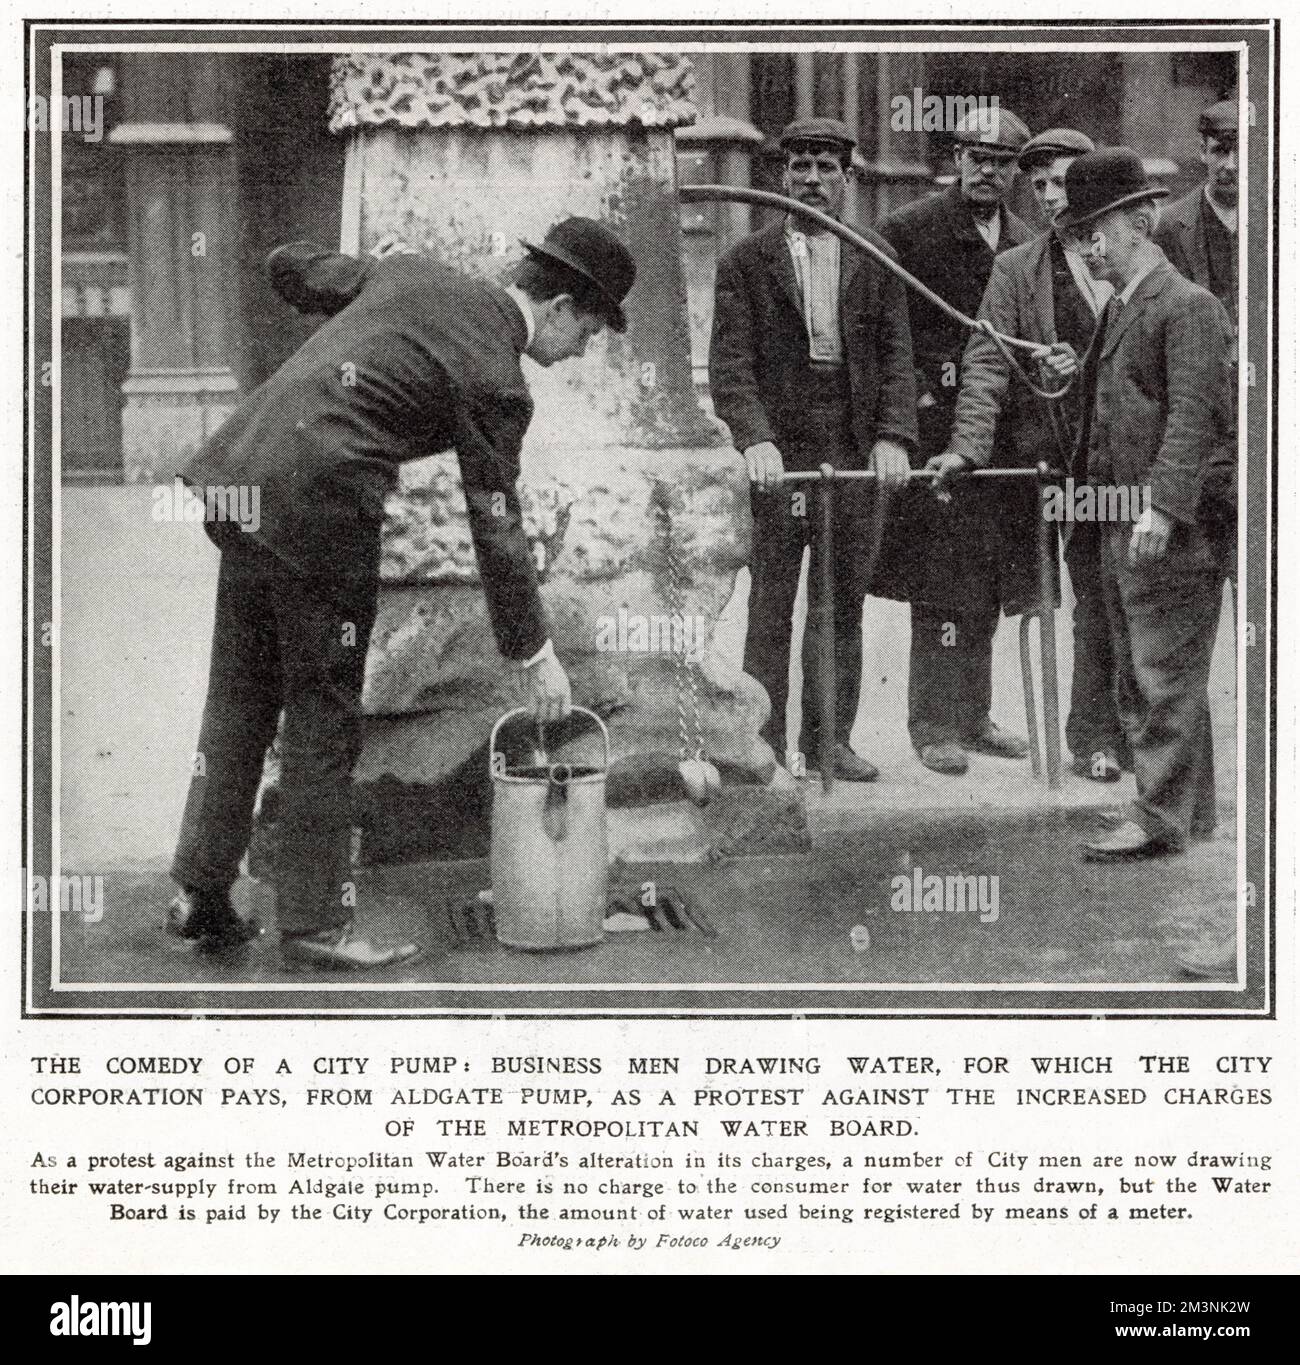 Local businesses were on protest against the increase charges of the Metropolitan Water Board on their registered meter. Photograph showing London City workers drawing water from the free Aldgate Pump to save money.      Date: 1908 Stock Photo